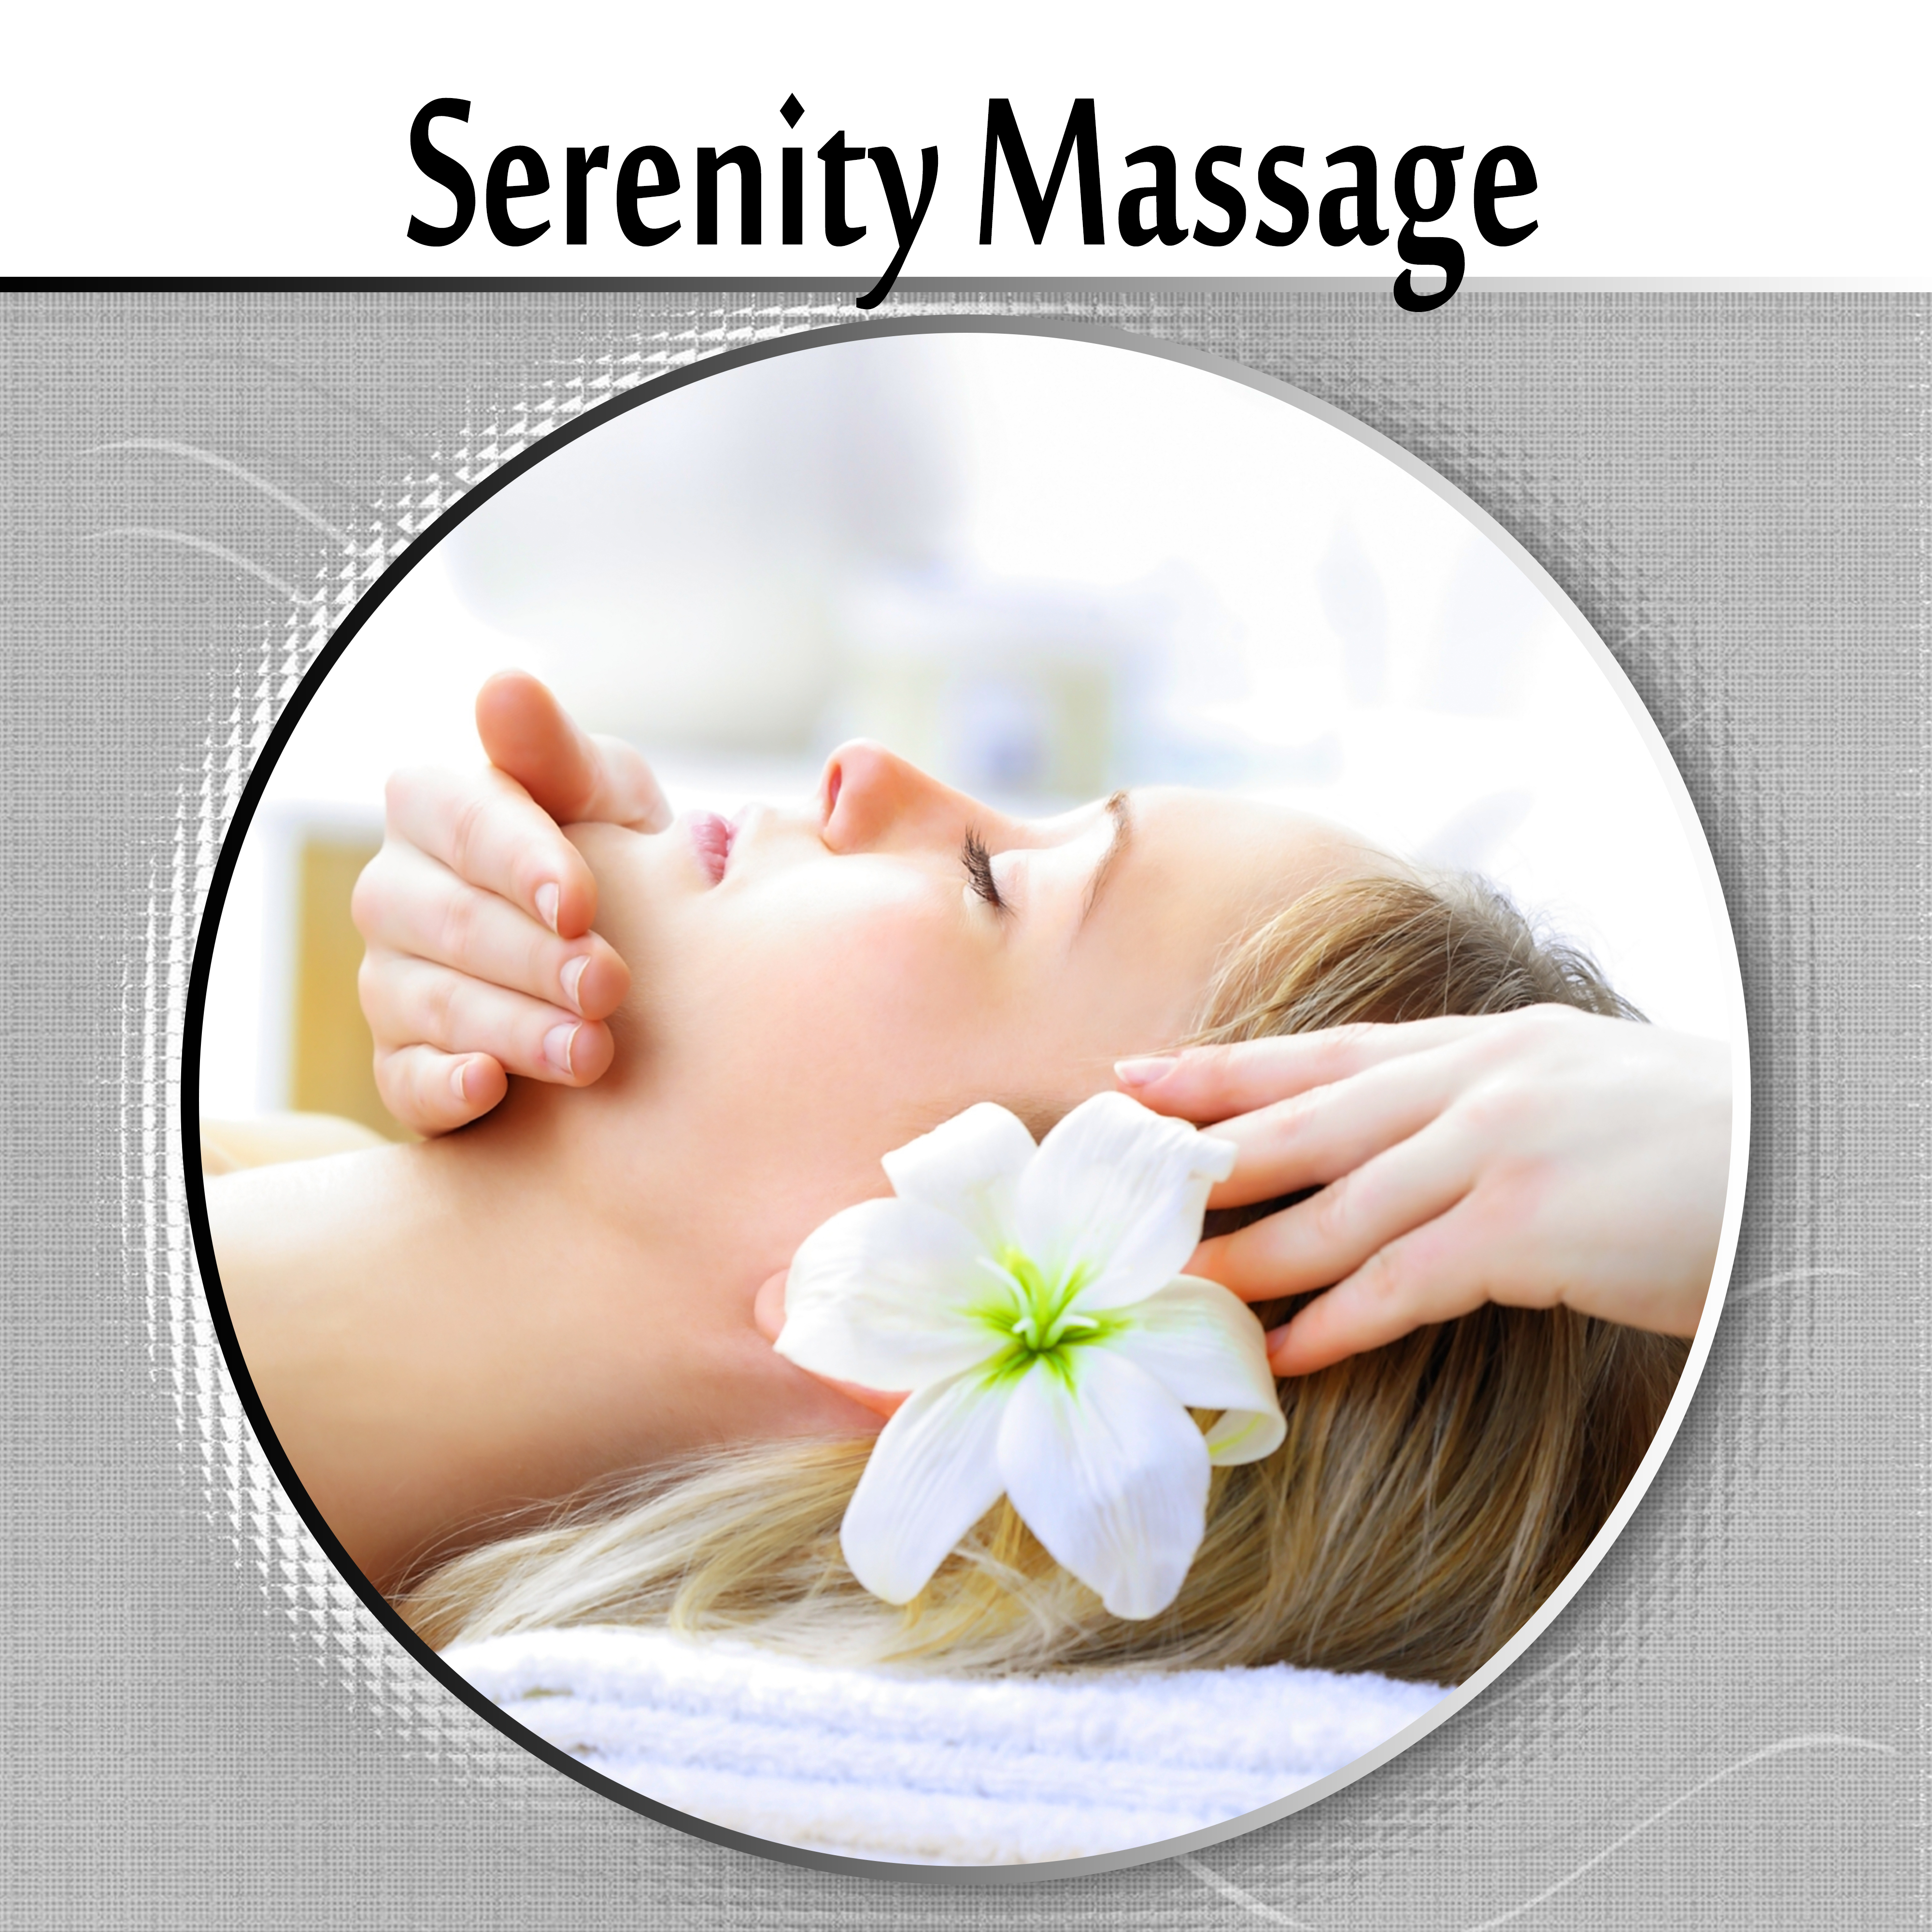 Serenity Massage – Spa Wellness, Smooth Music, Nature Sound, Gentle Touch, Flute, Piano, Asian Massage